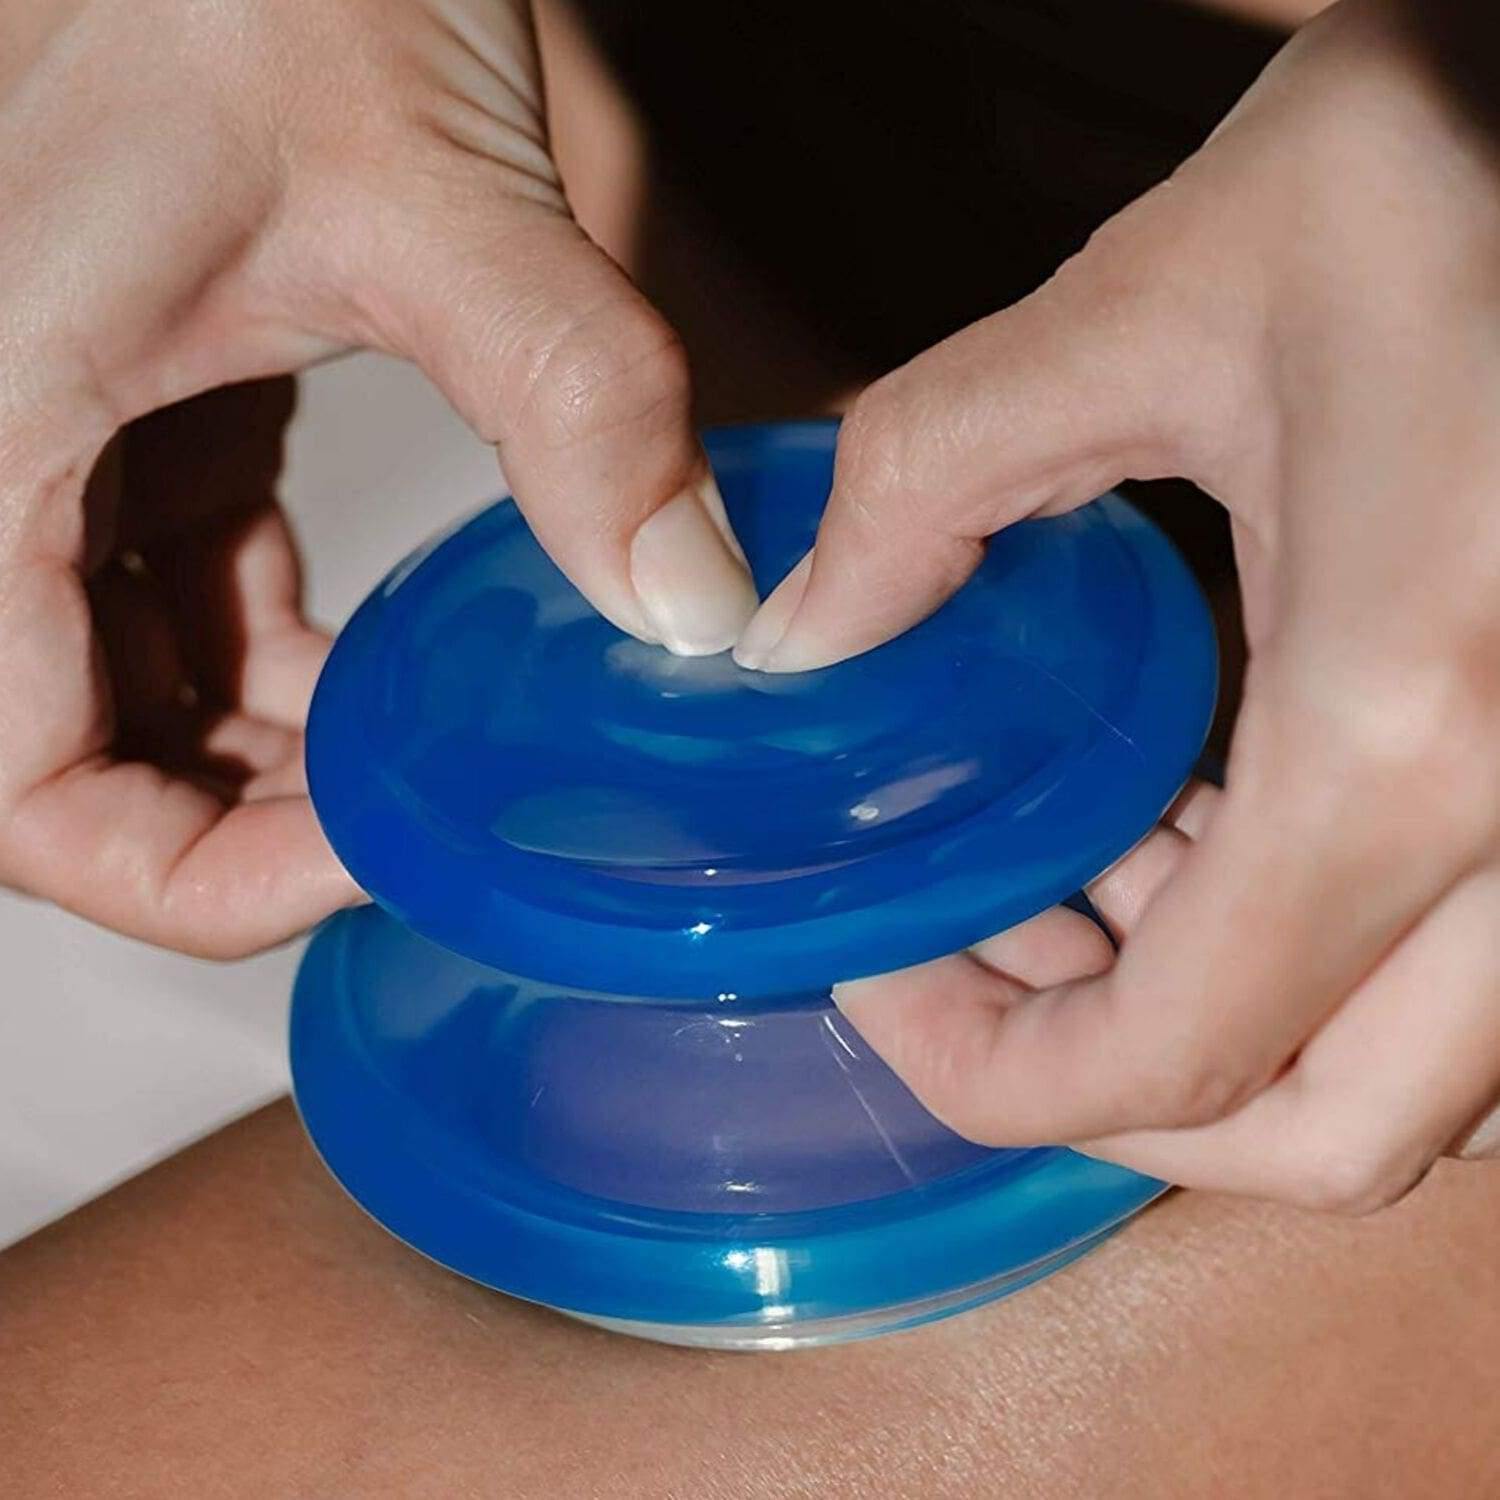 Lure Essentials EDGE™ Cupping Set for Easy At-Home Cupping Therapy